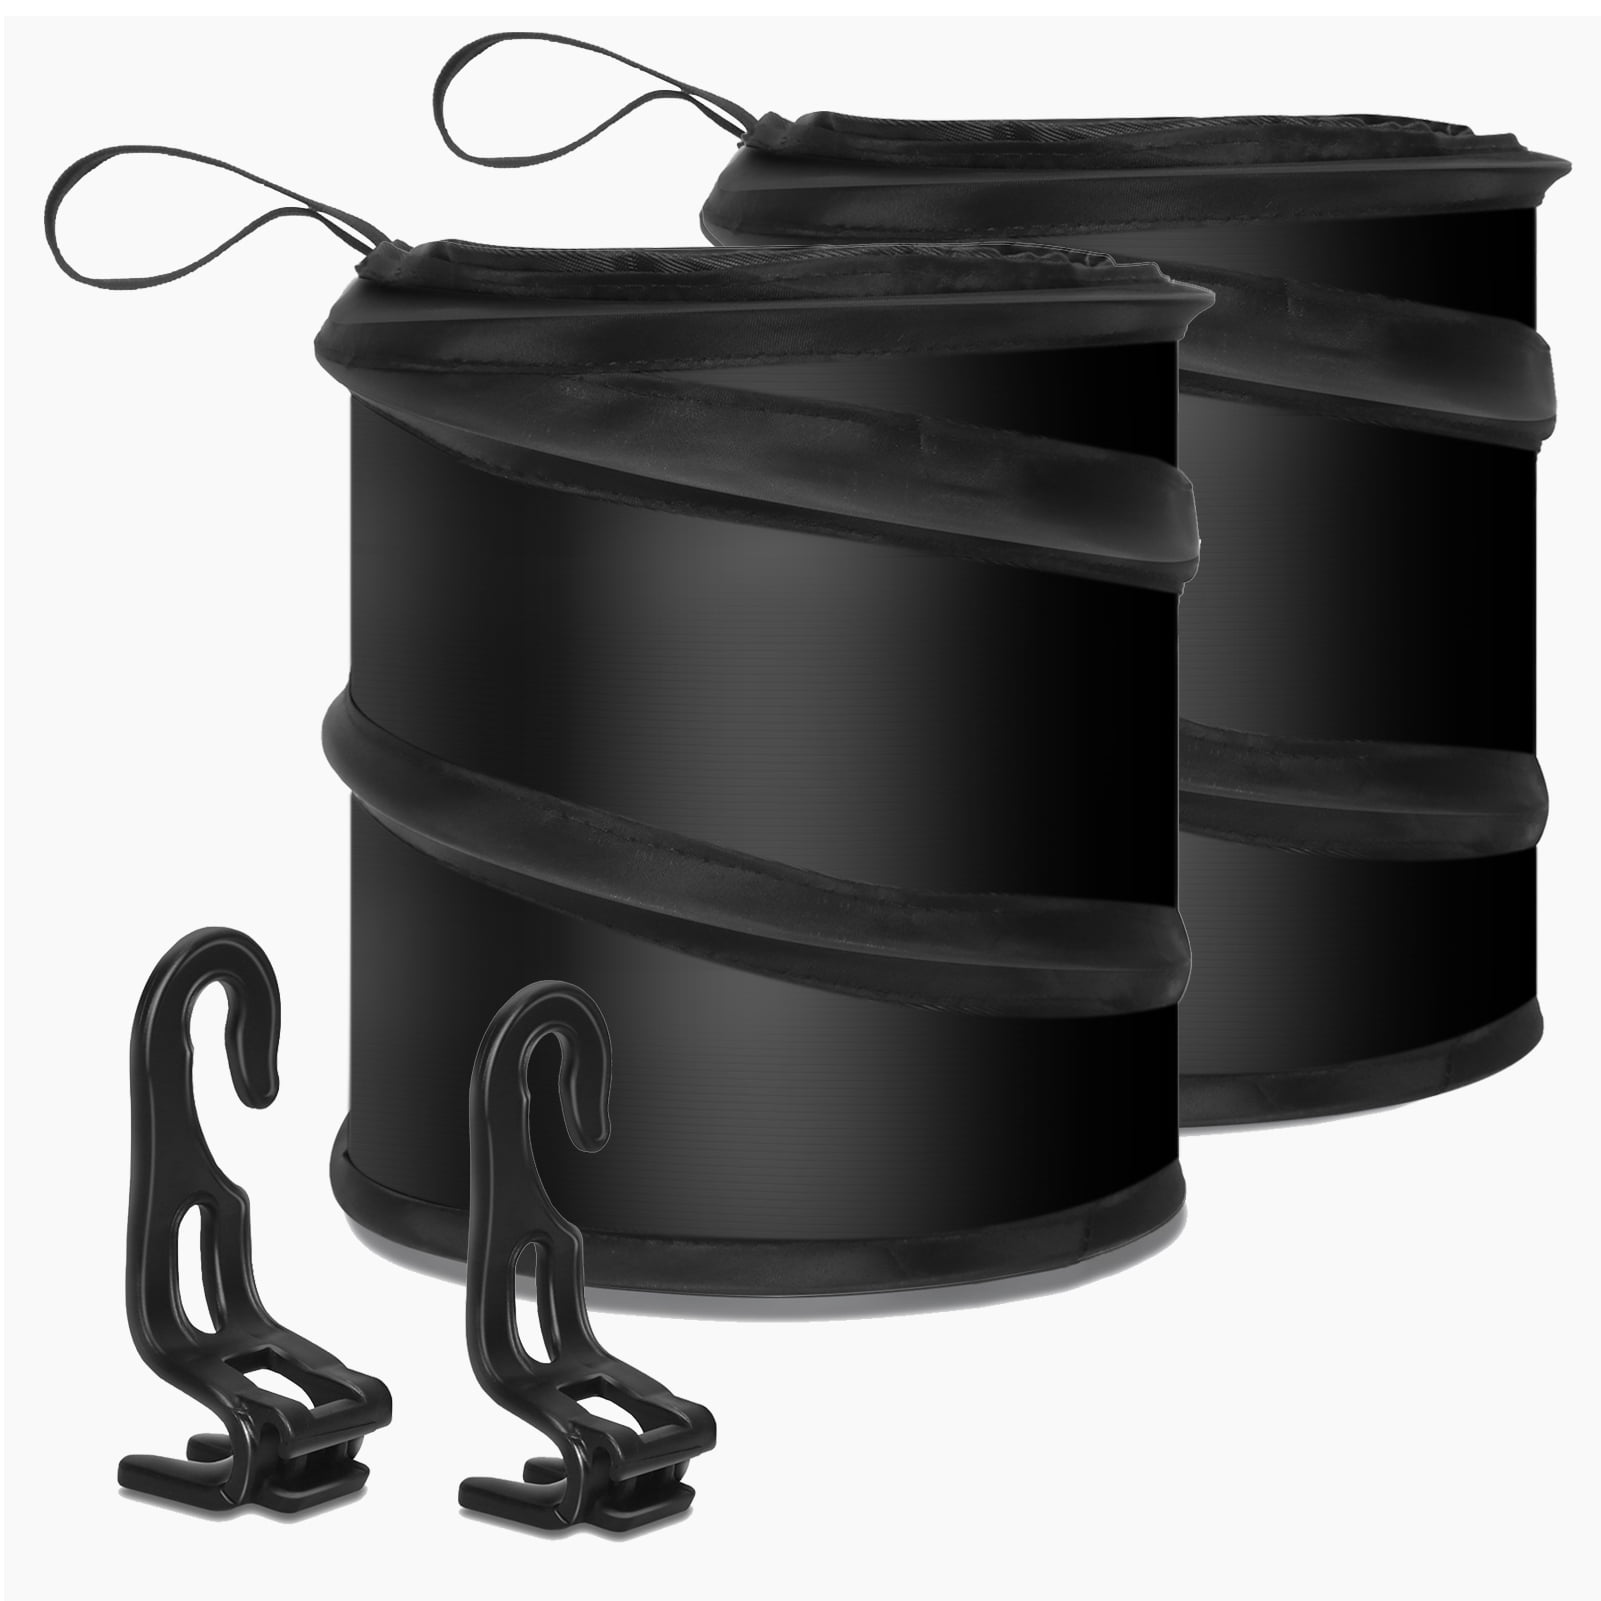 Black, 1 Pack Portable Garbage Bin Rubbish Bin JUSTTOP Car Trash Can with Lid Collapsible Pop-up 